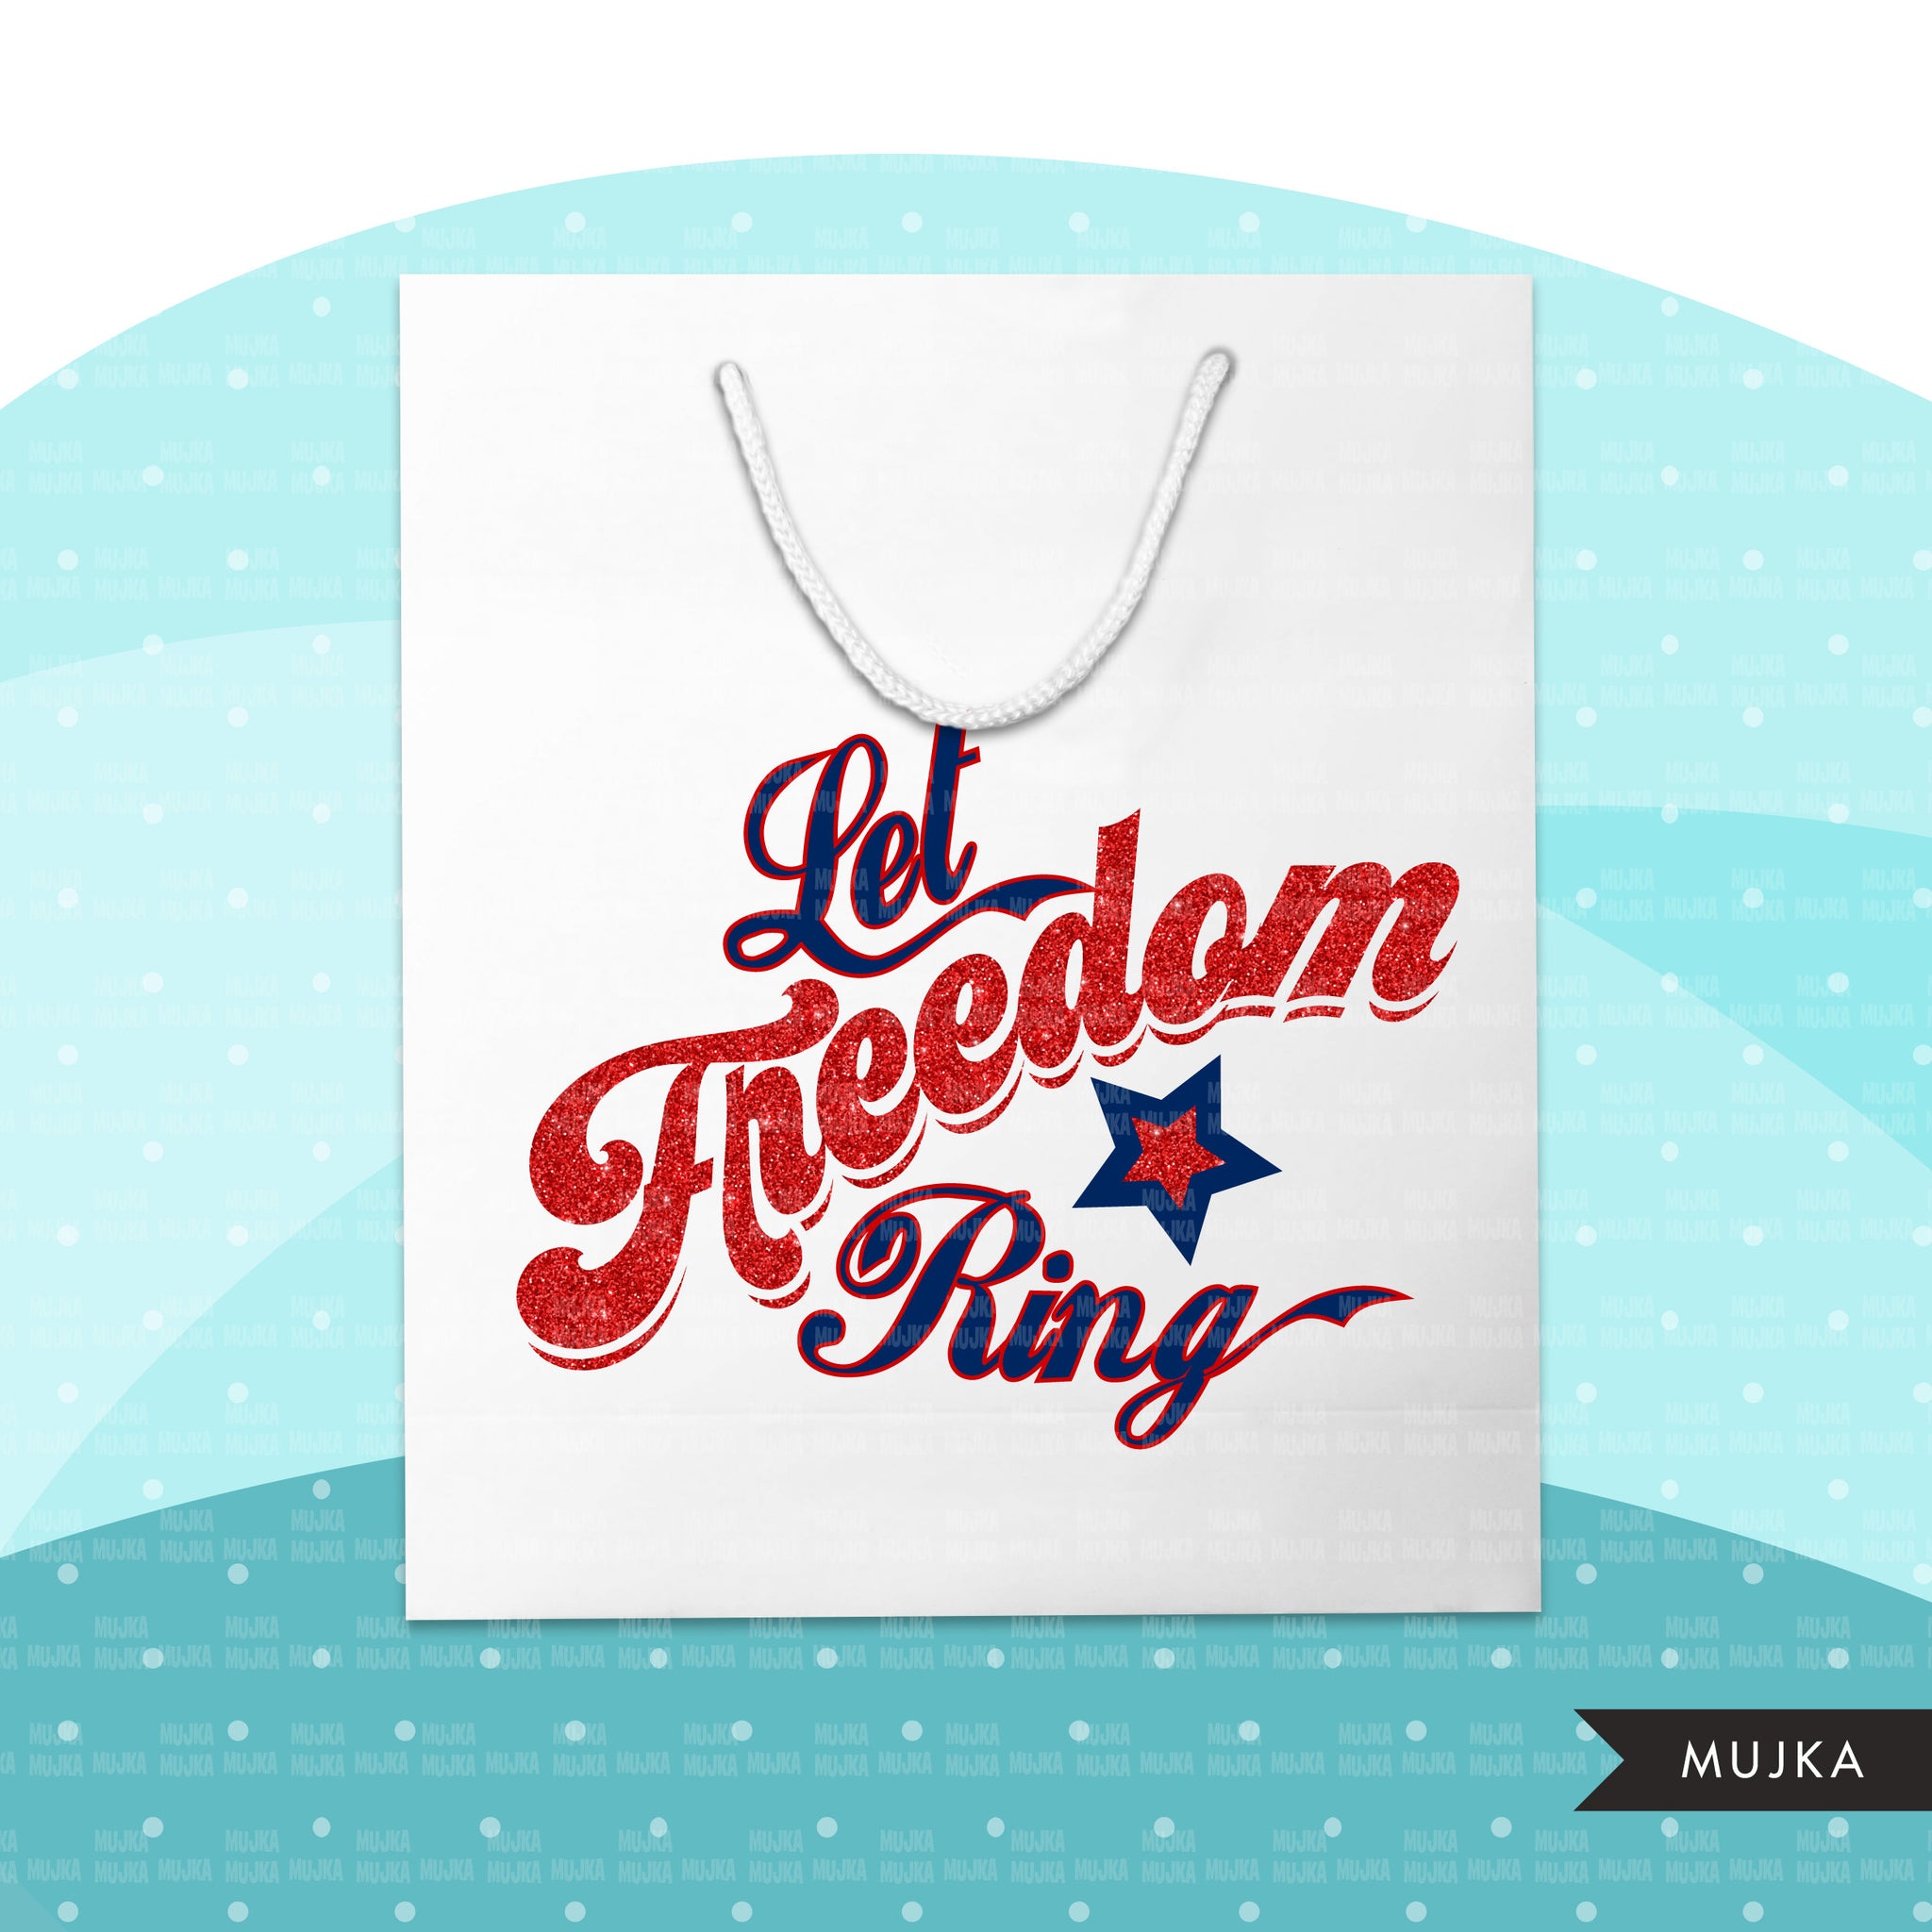 Veterans Day clipart, patriotic sublimation designs download, 4th of July, USA patriots, let freedom ring shirt, Martin Luther King quotes